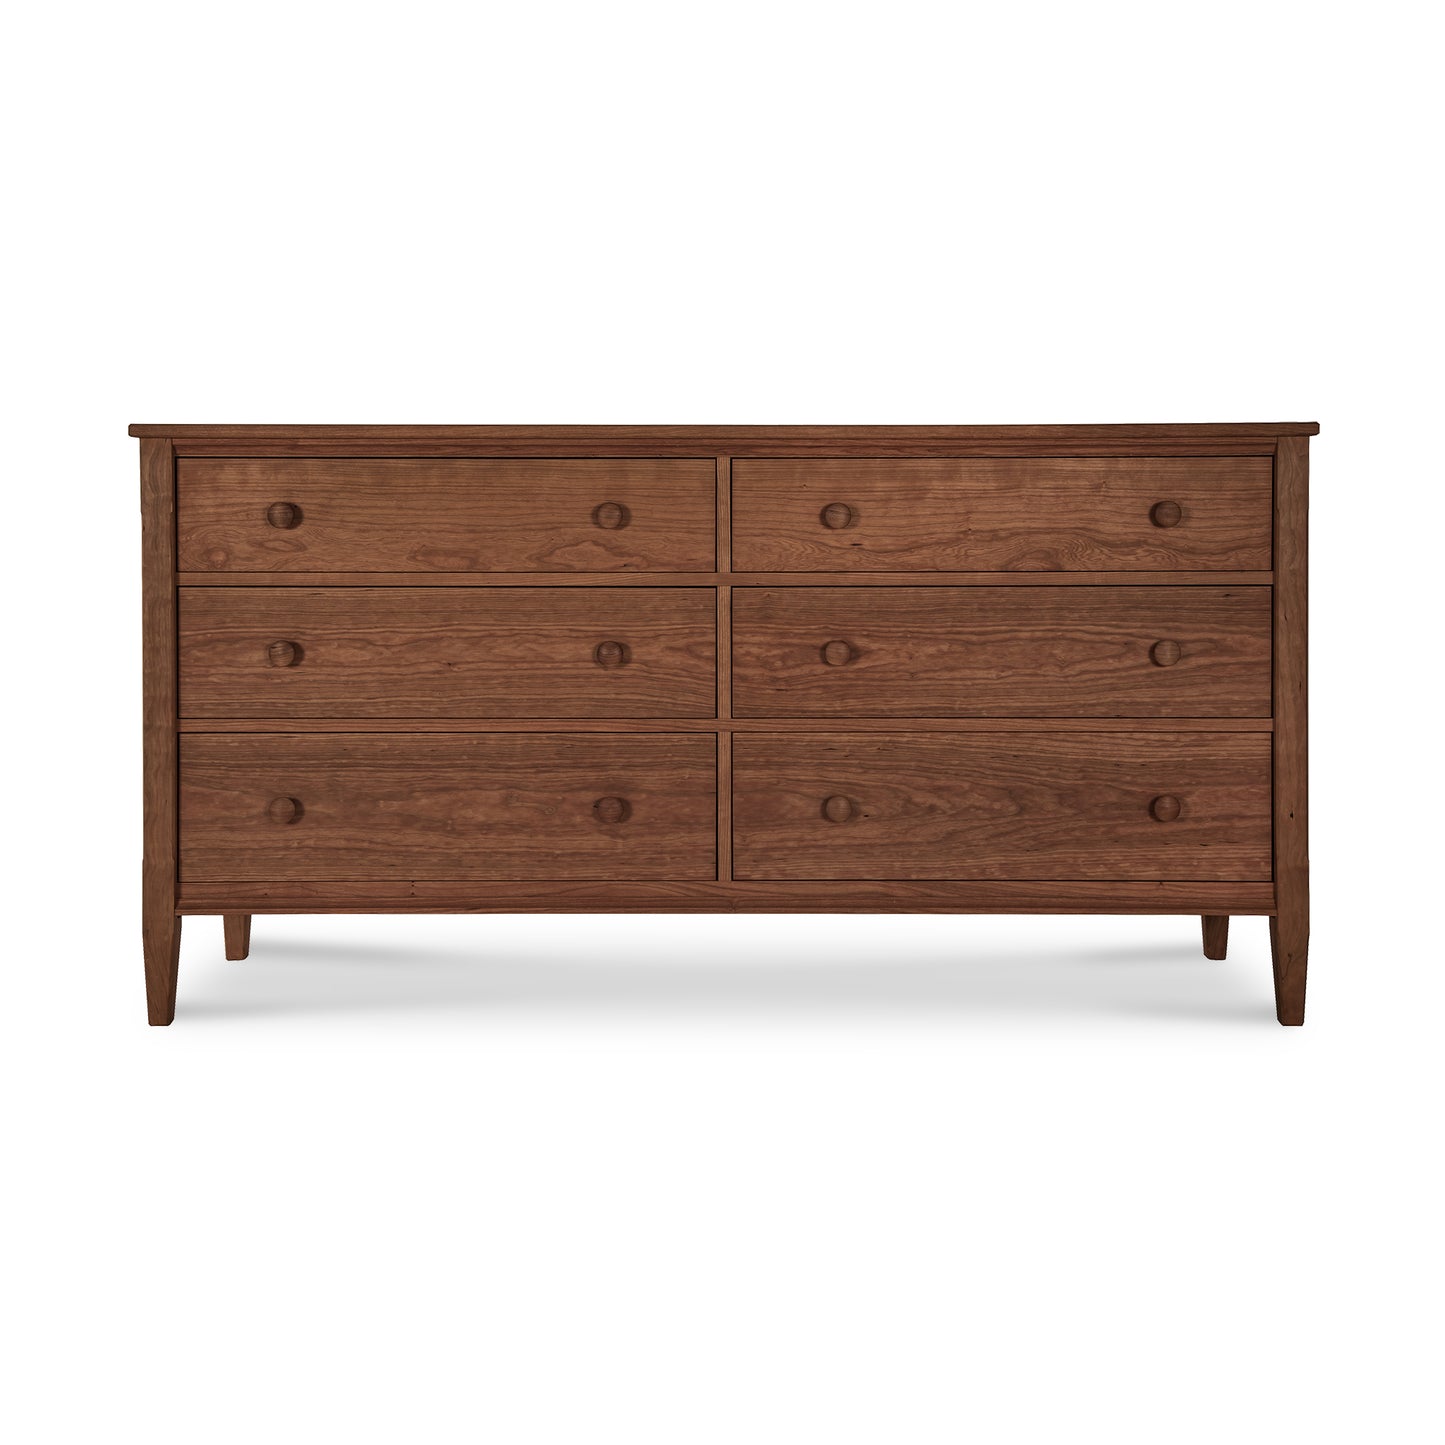 A Vermont Shaker 6-Drawer Dresser by Maple Corner Woodworks, featuring a symmetrical design and round knobs, isolated on a white background.